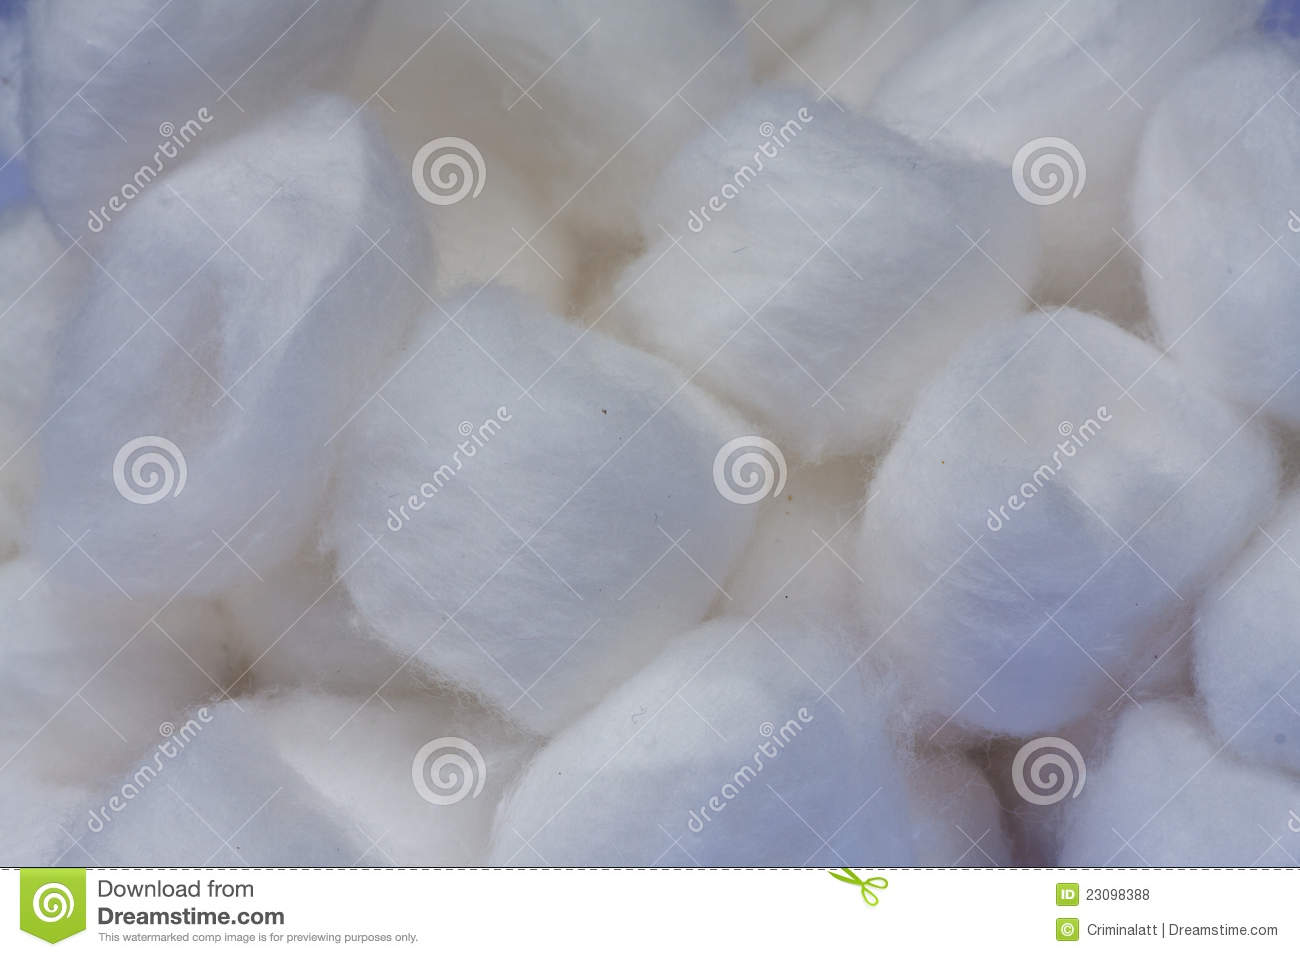 Cotton Ball Clipart Images   Pictures   Becuo